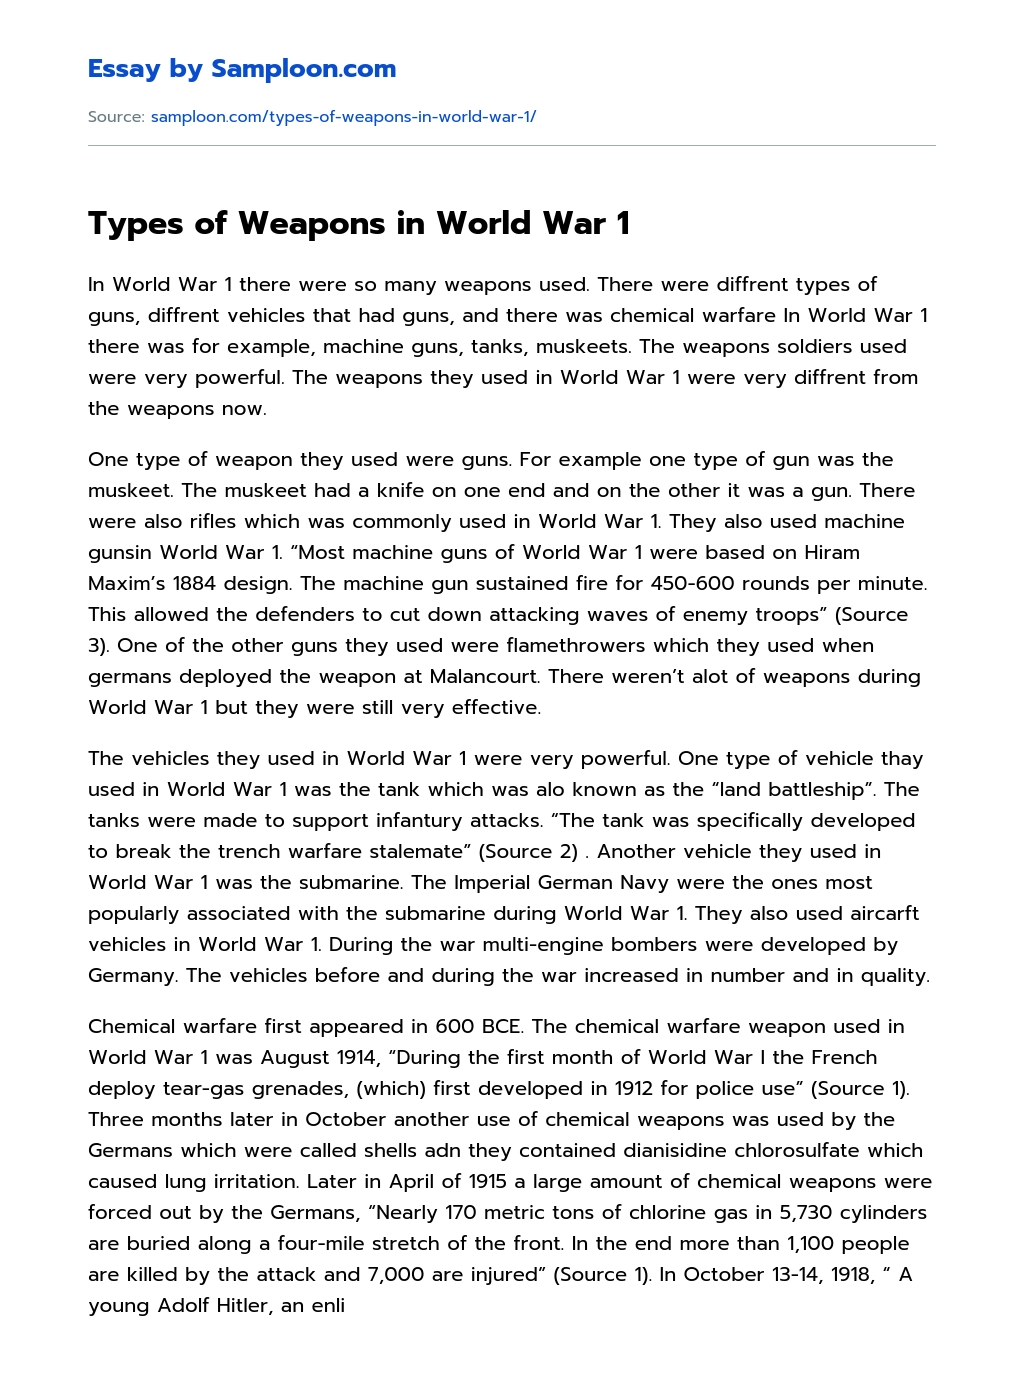 Types of Weapons in World War 1 essay